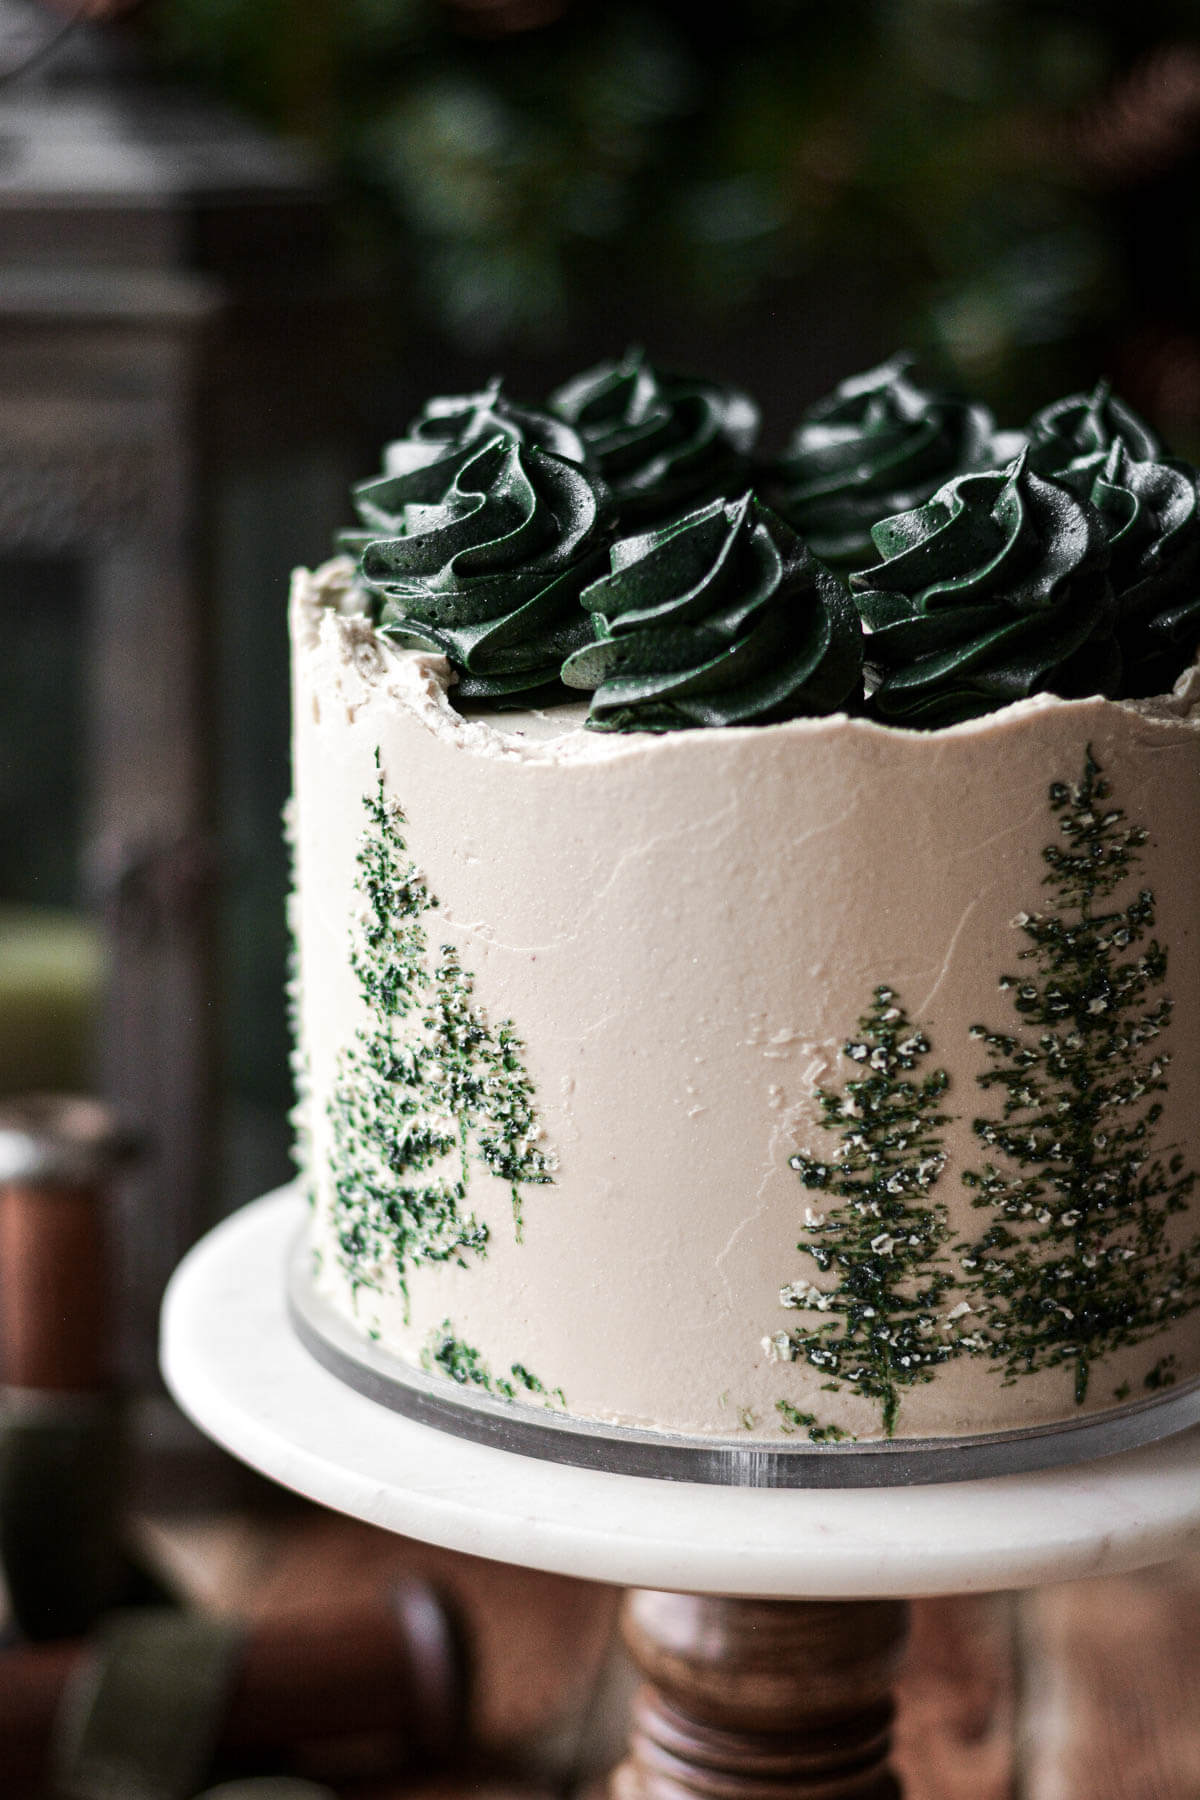 Green evergreen trees painted onto the side of a cake.